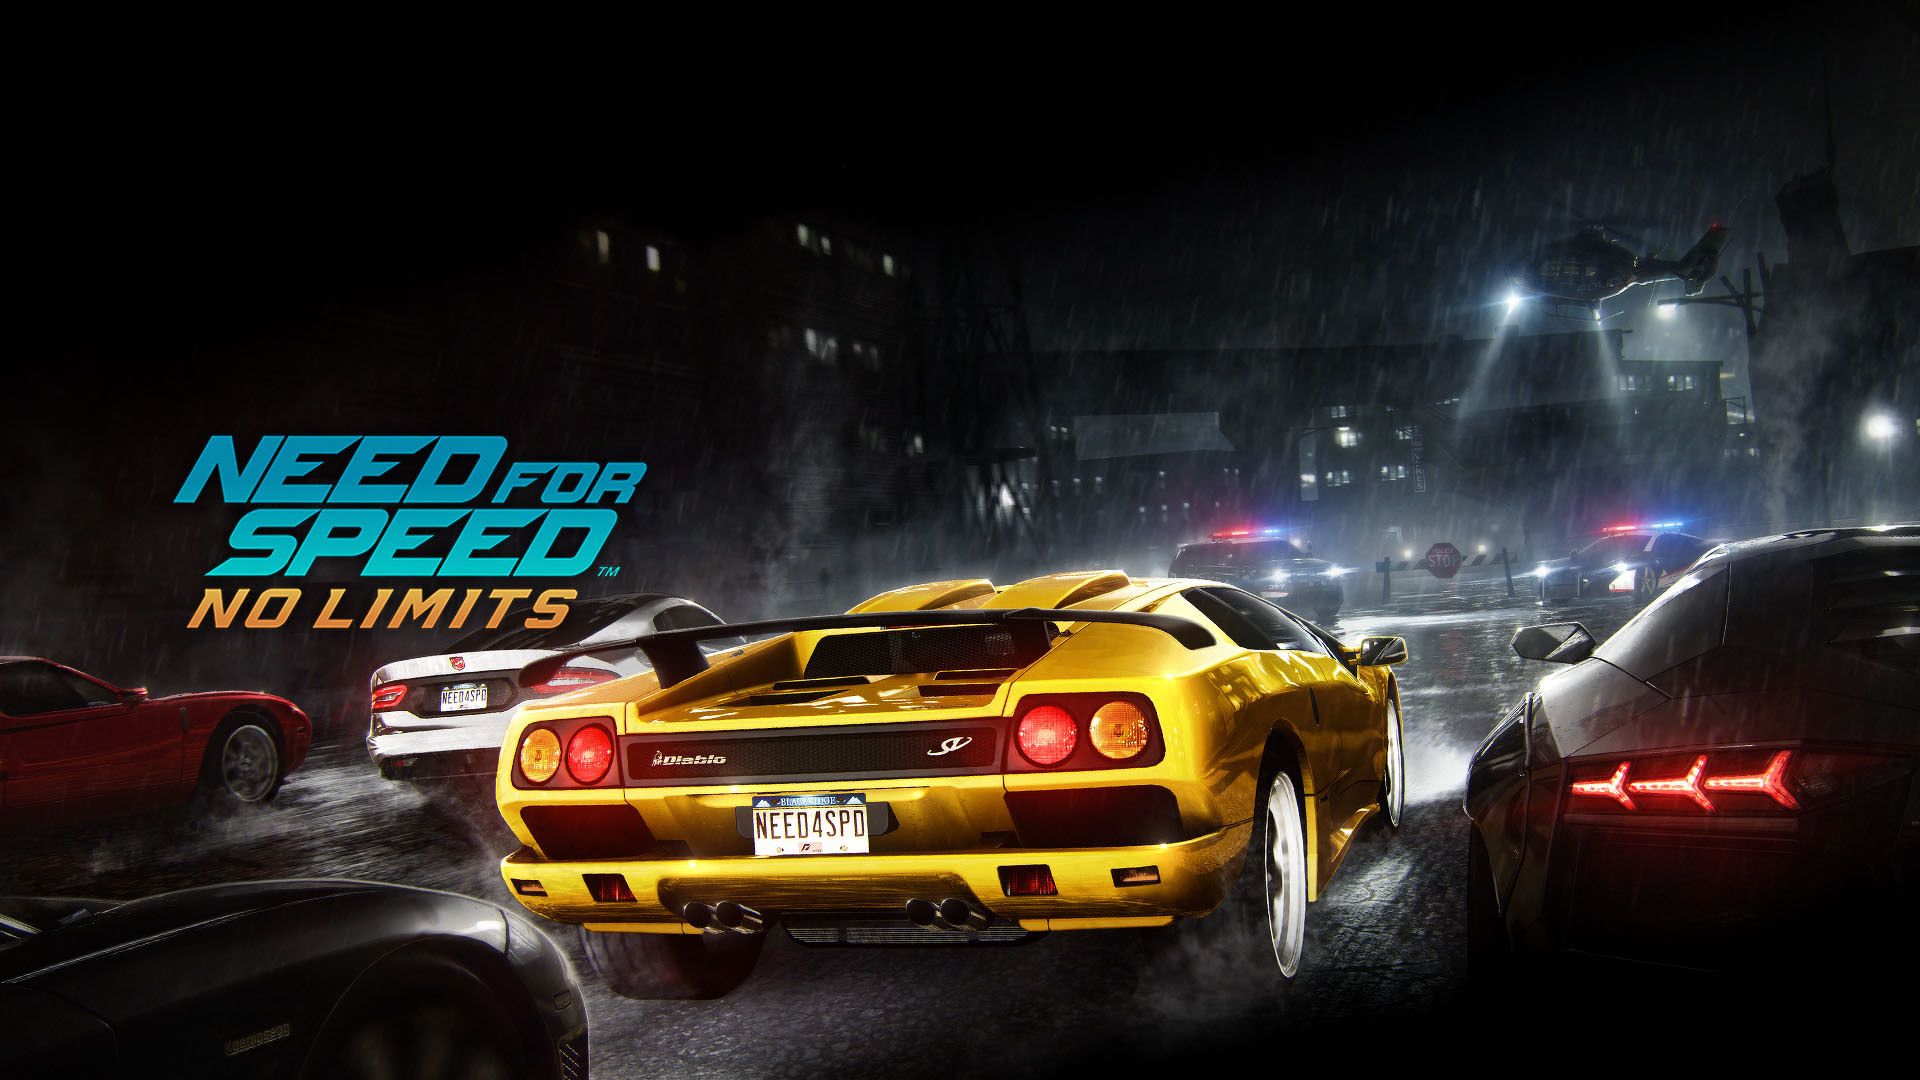 Need for Speed No Limits update offers players a Diablo